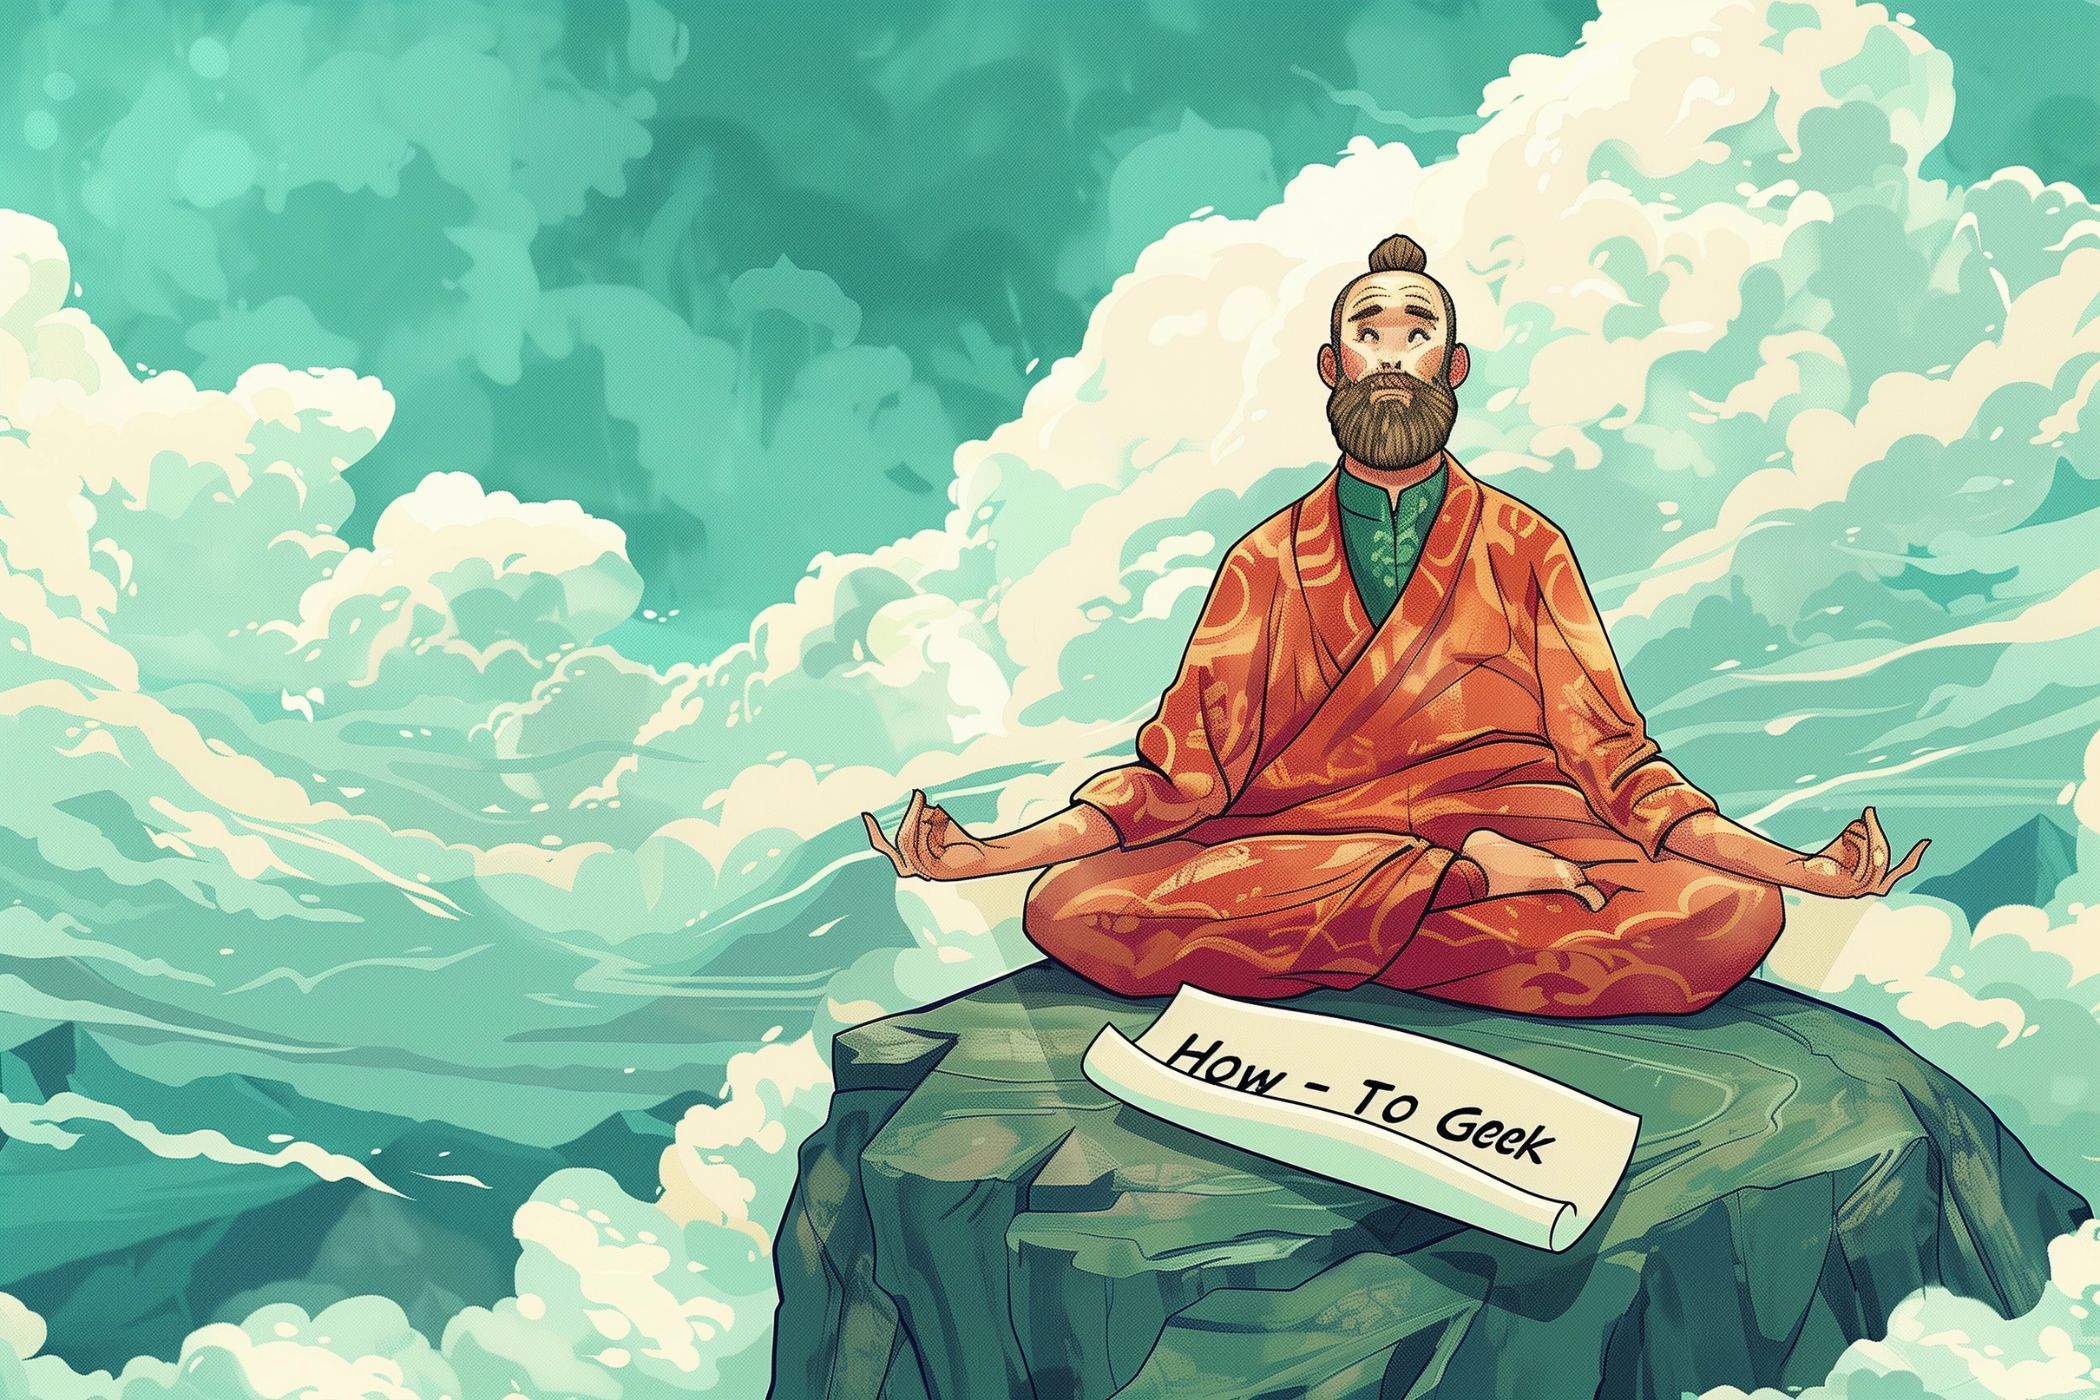 A meditating man sitting on a mountaintop with a scroll that reads 'How-To Geek' unfurled in front of him.